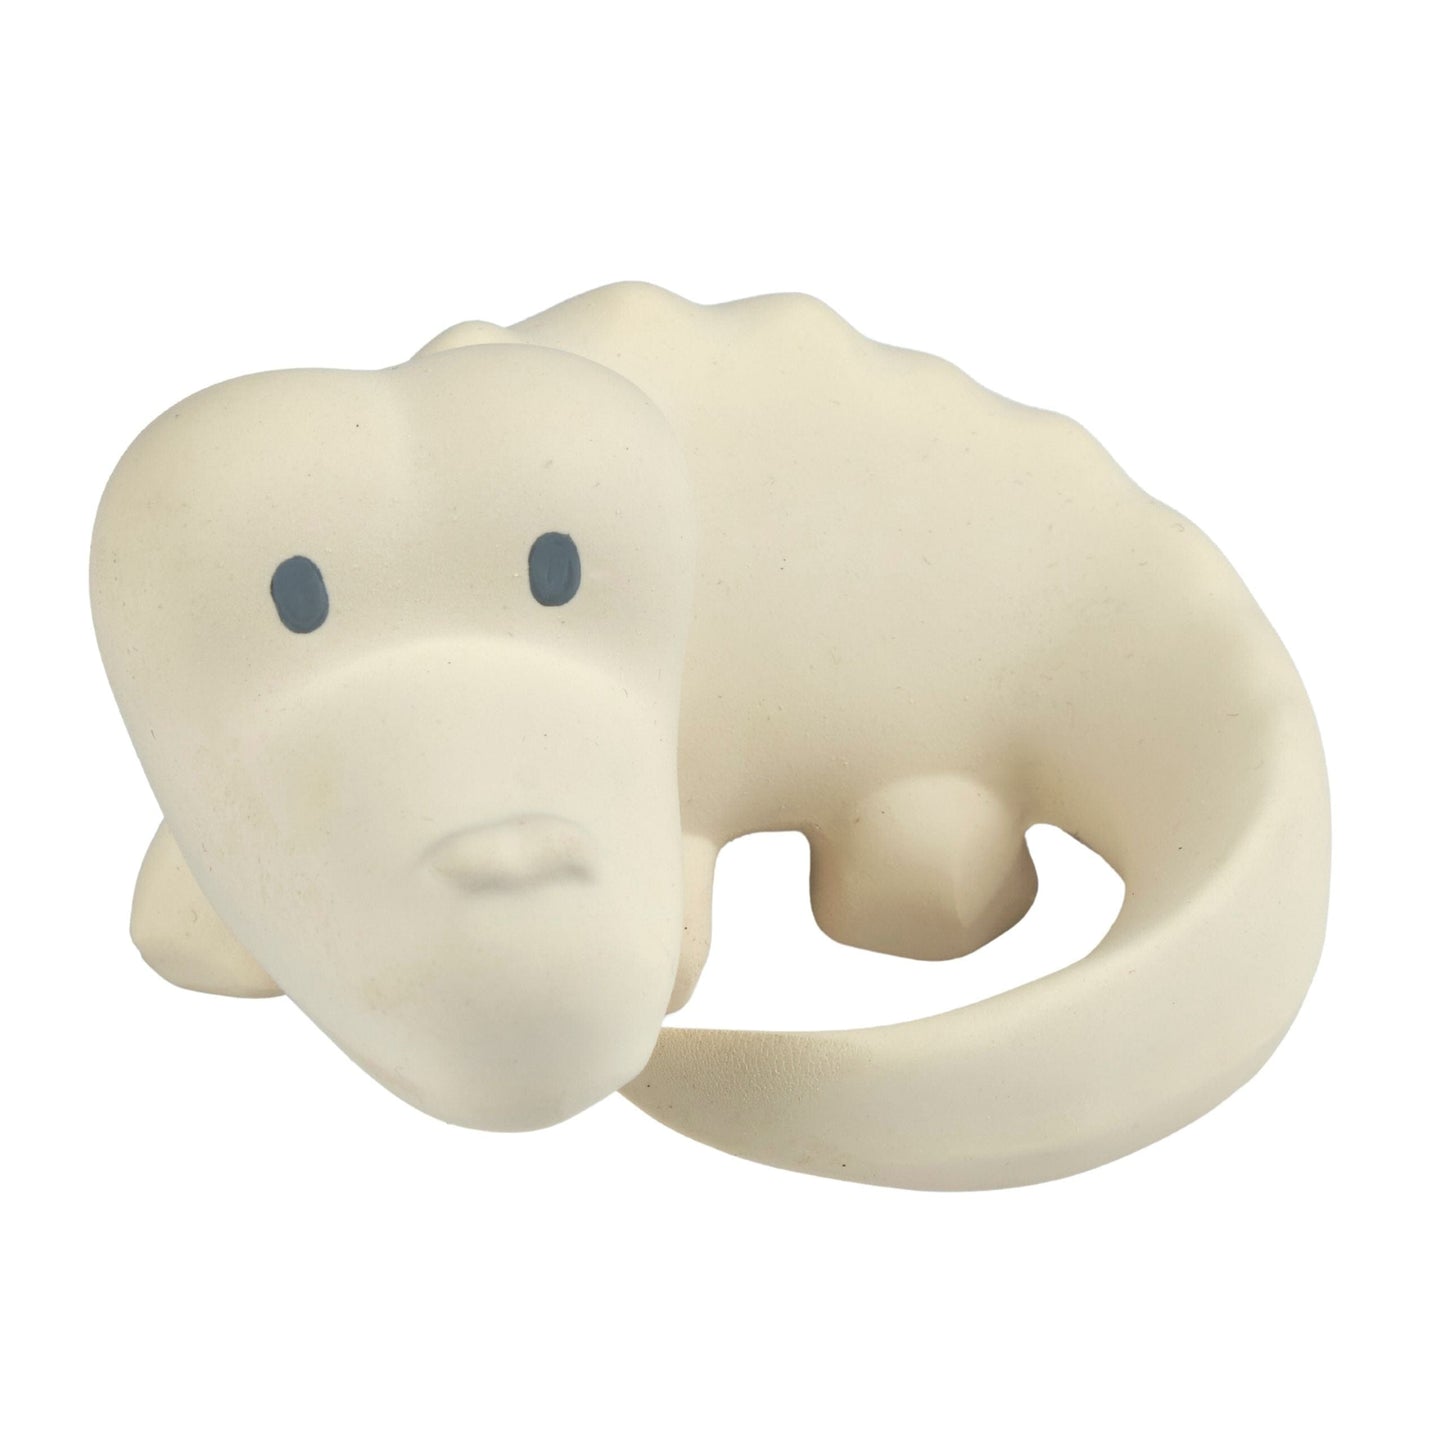 Marshmallow Soft Organic Natural Rubber Rattles, Bath Toys & Teethers